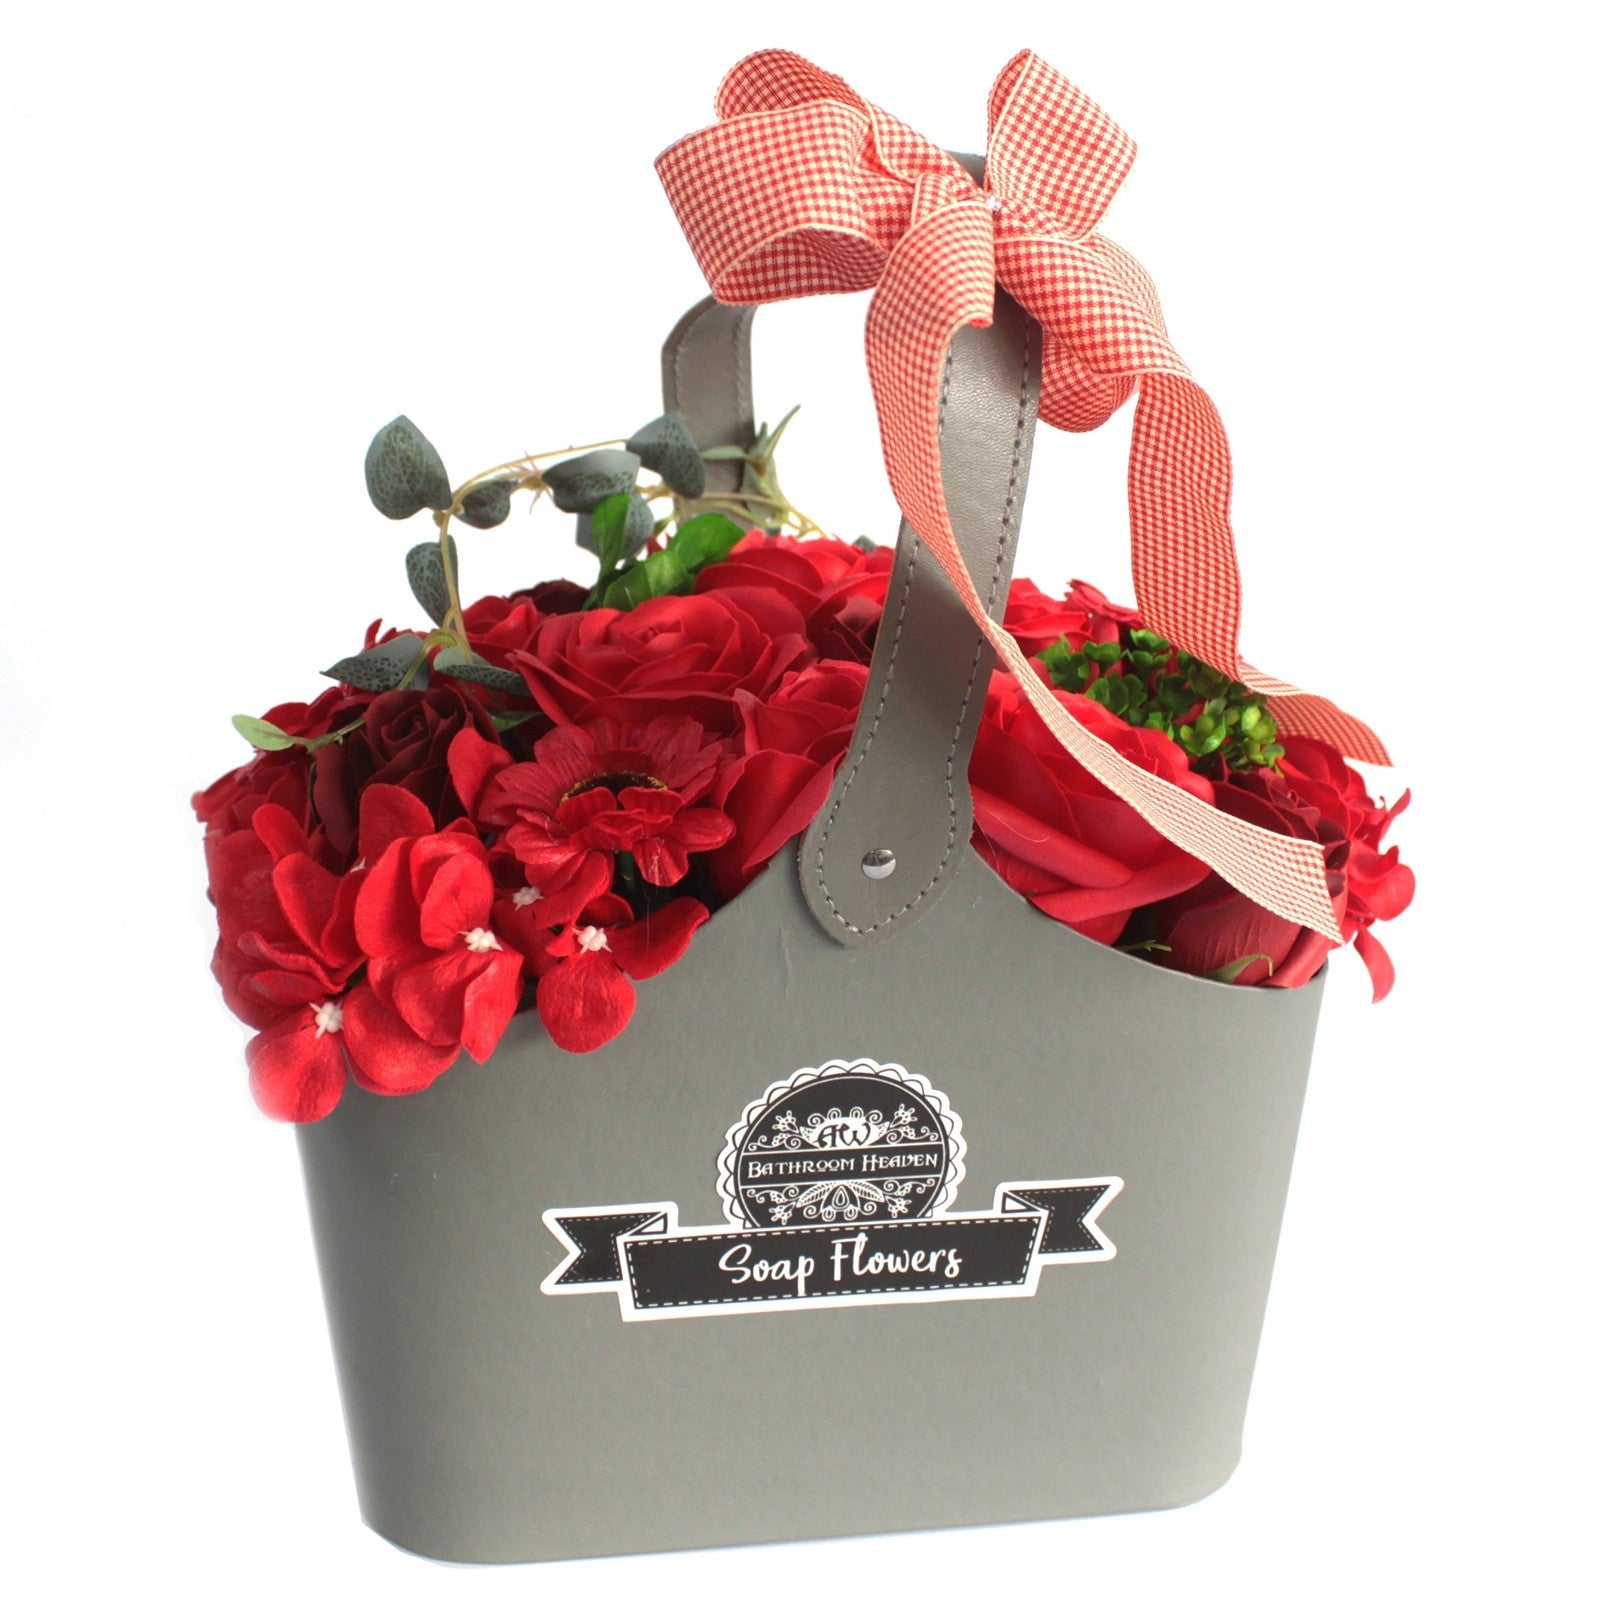 View Basket Soap Flower Bouquet Red information